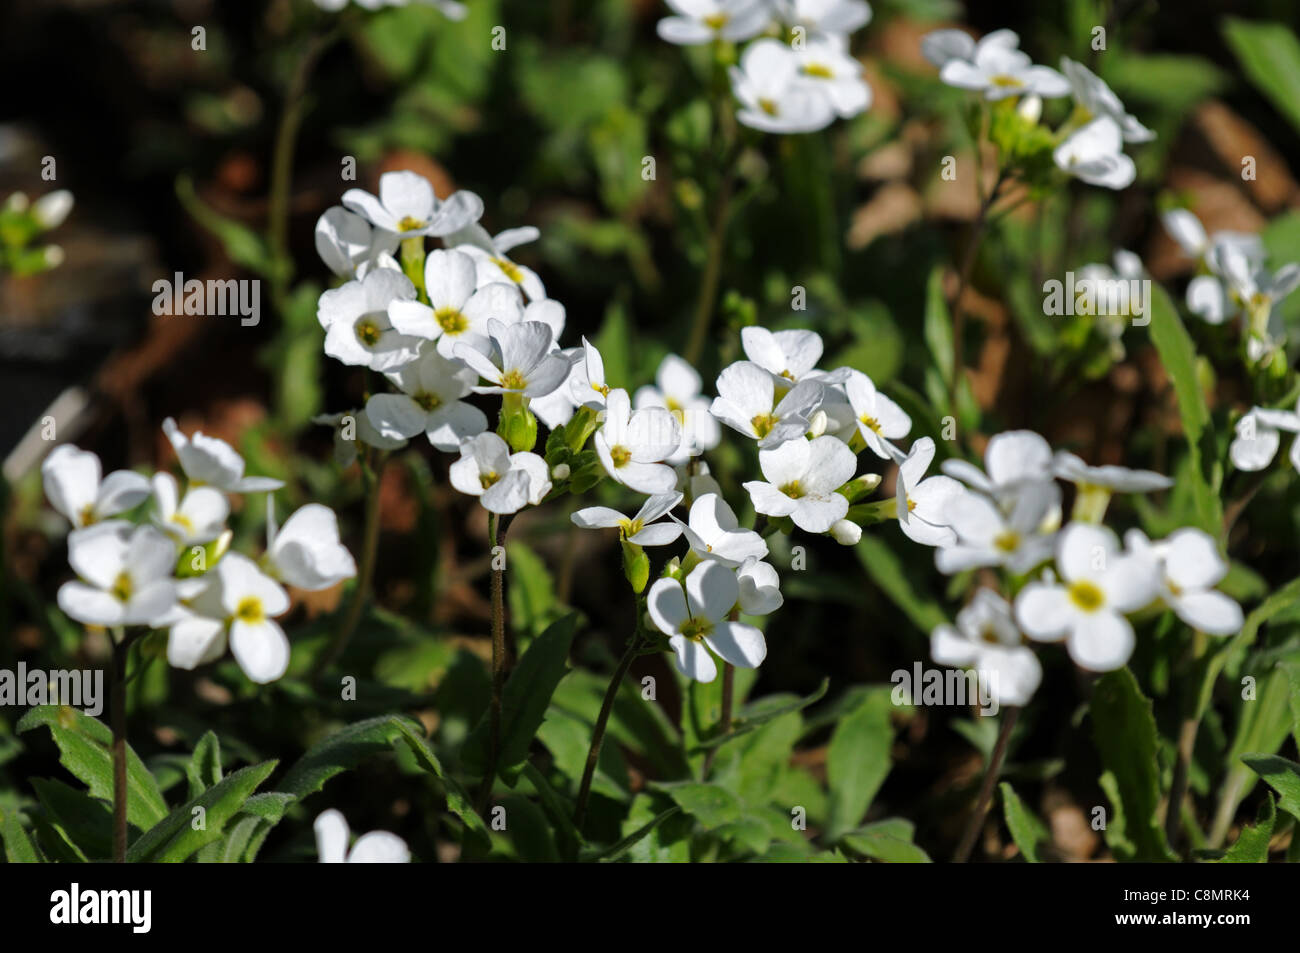 arabis sicula perennial herbaceous plant white flowers blooms blossoms dainty small spring Stock Photo